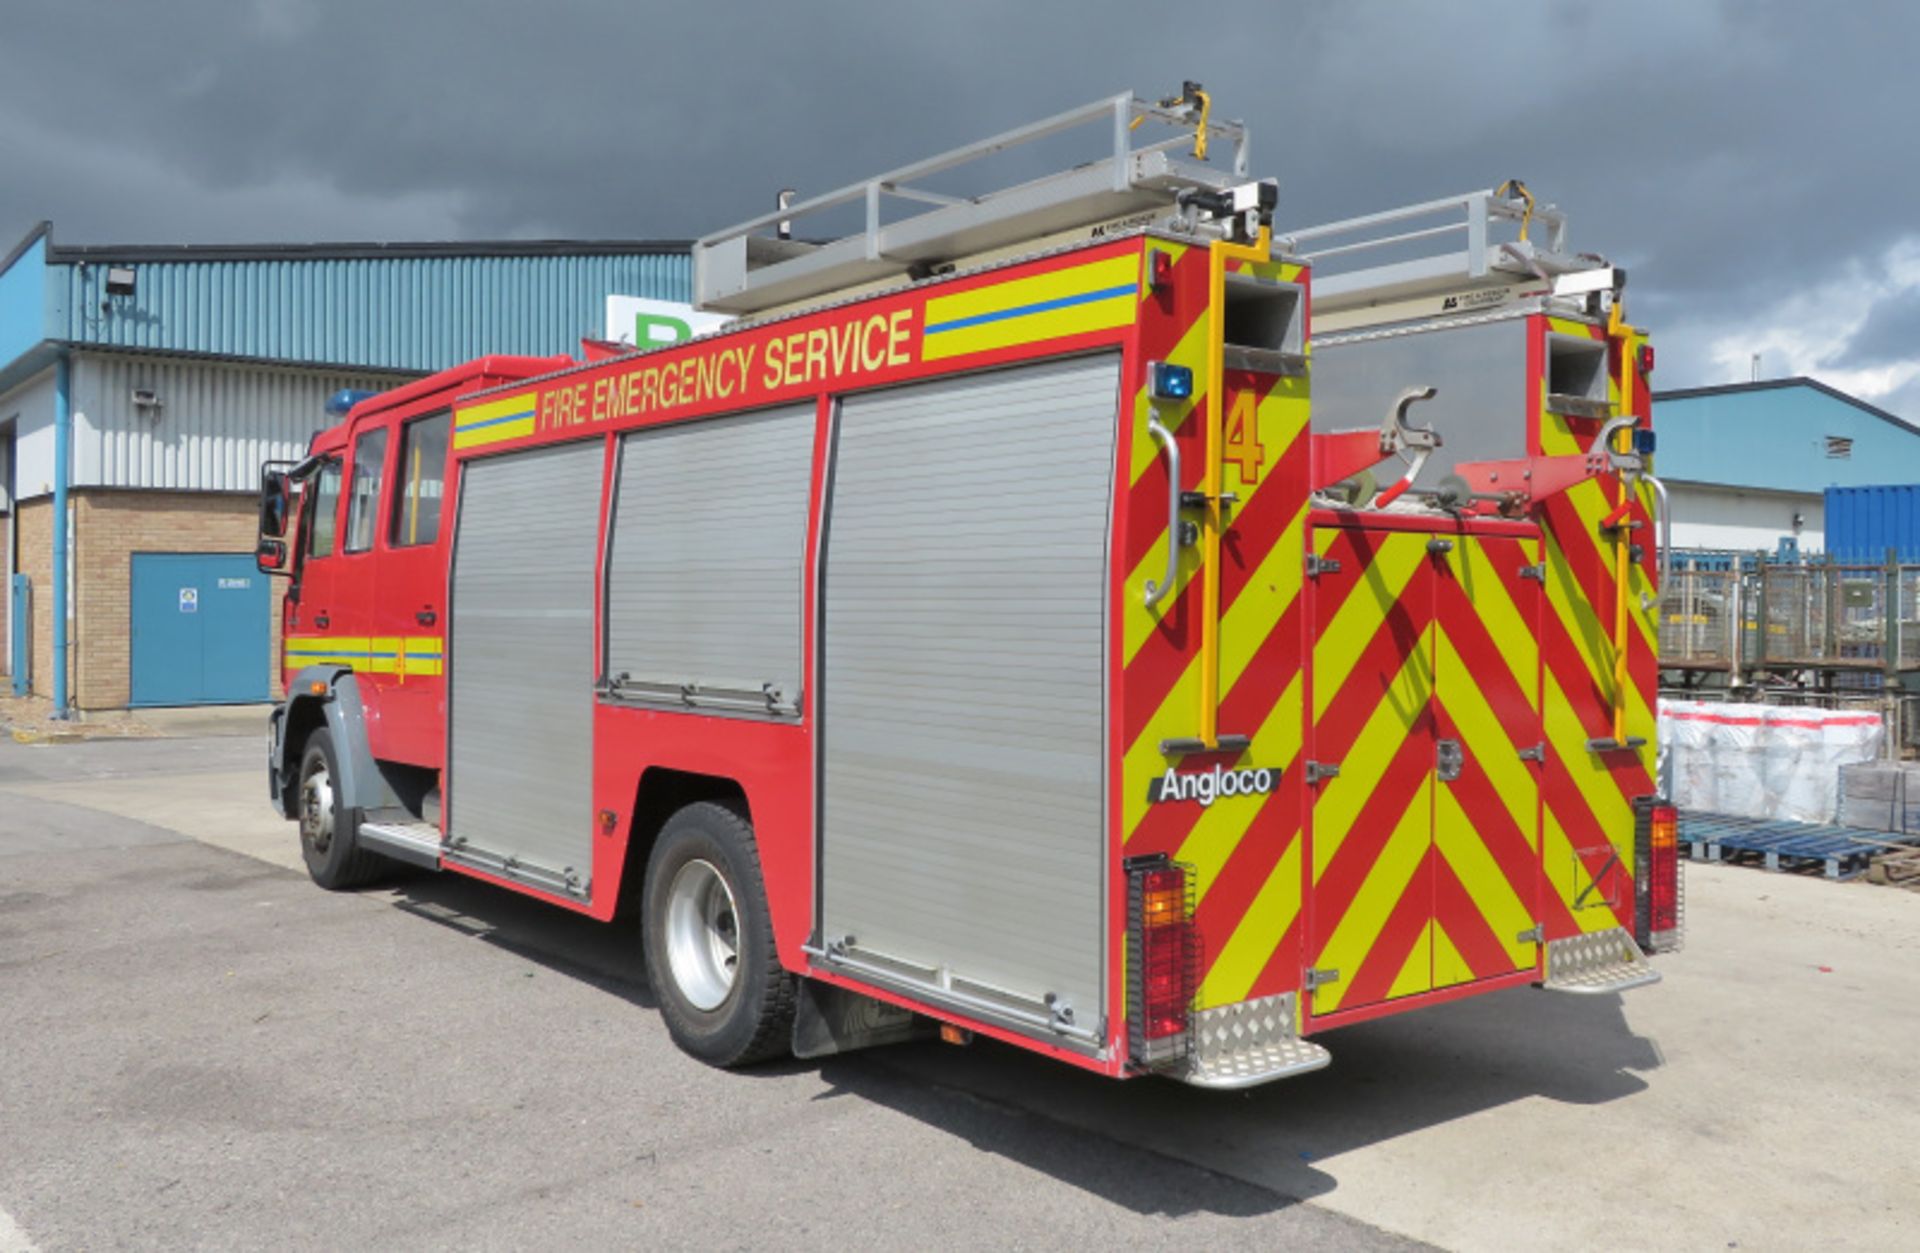 Man Angloco Fire Engine - LE15.220 - 52788 miles - winch - Unit been used 713hr - 6871CC - Image 4 of 35